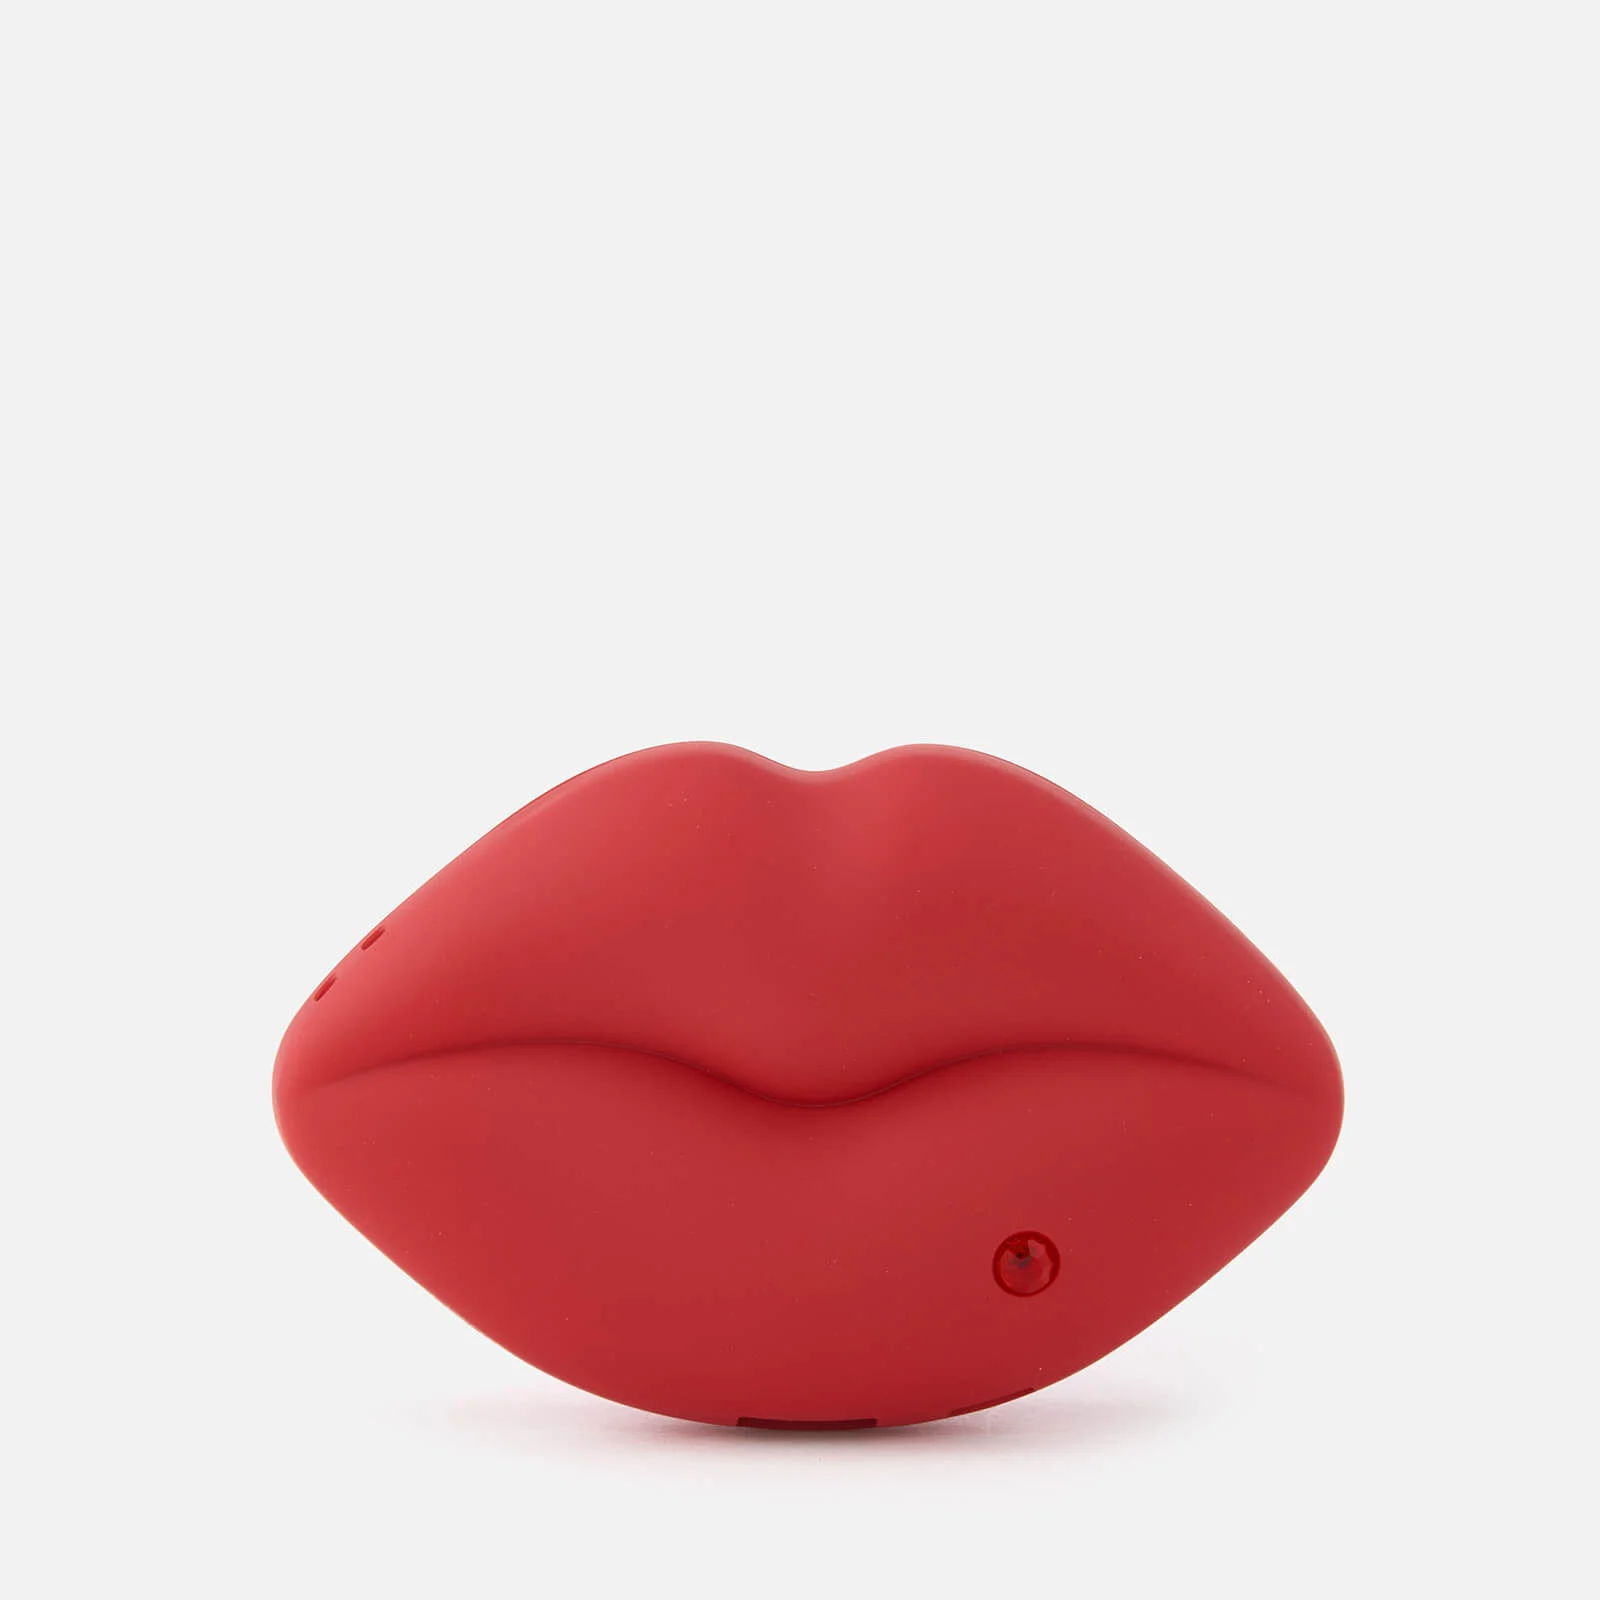 Lulu Guinness Women's Lips Phone Charger - Red Image 1